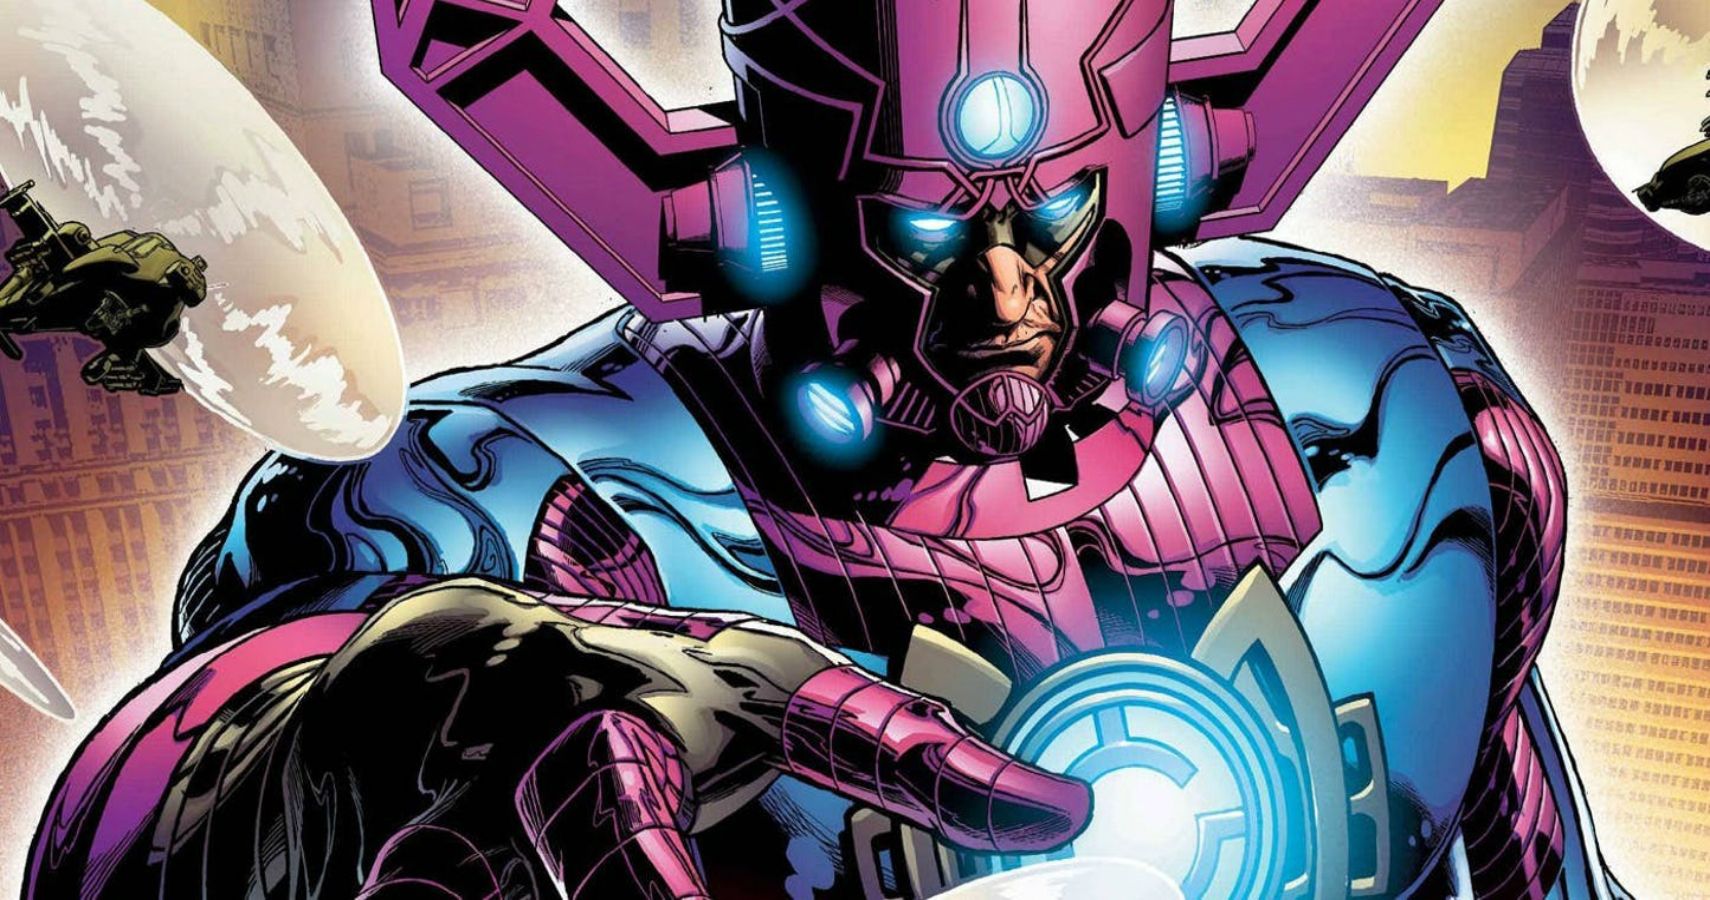 galactus most powerful marvel character, most powerful marvel character, strongest marvel character, strongest marvel characters, who is the strongest marvel character, who is the most powerful marvel character, most powerful marvel characters, strongest character in marvel, marvel strongest characters, most powerful character in marvel, the most powerful marvel character, 